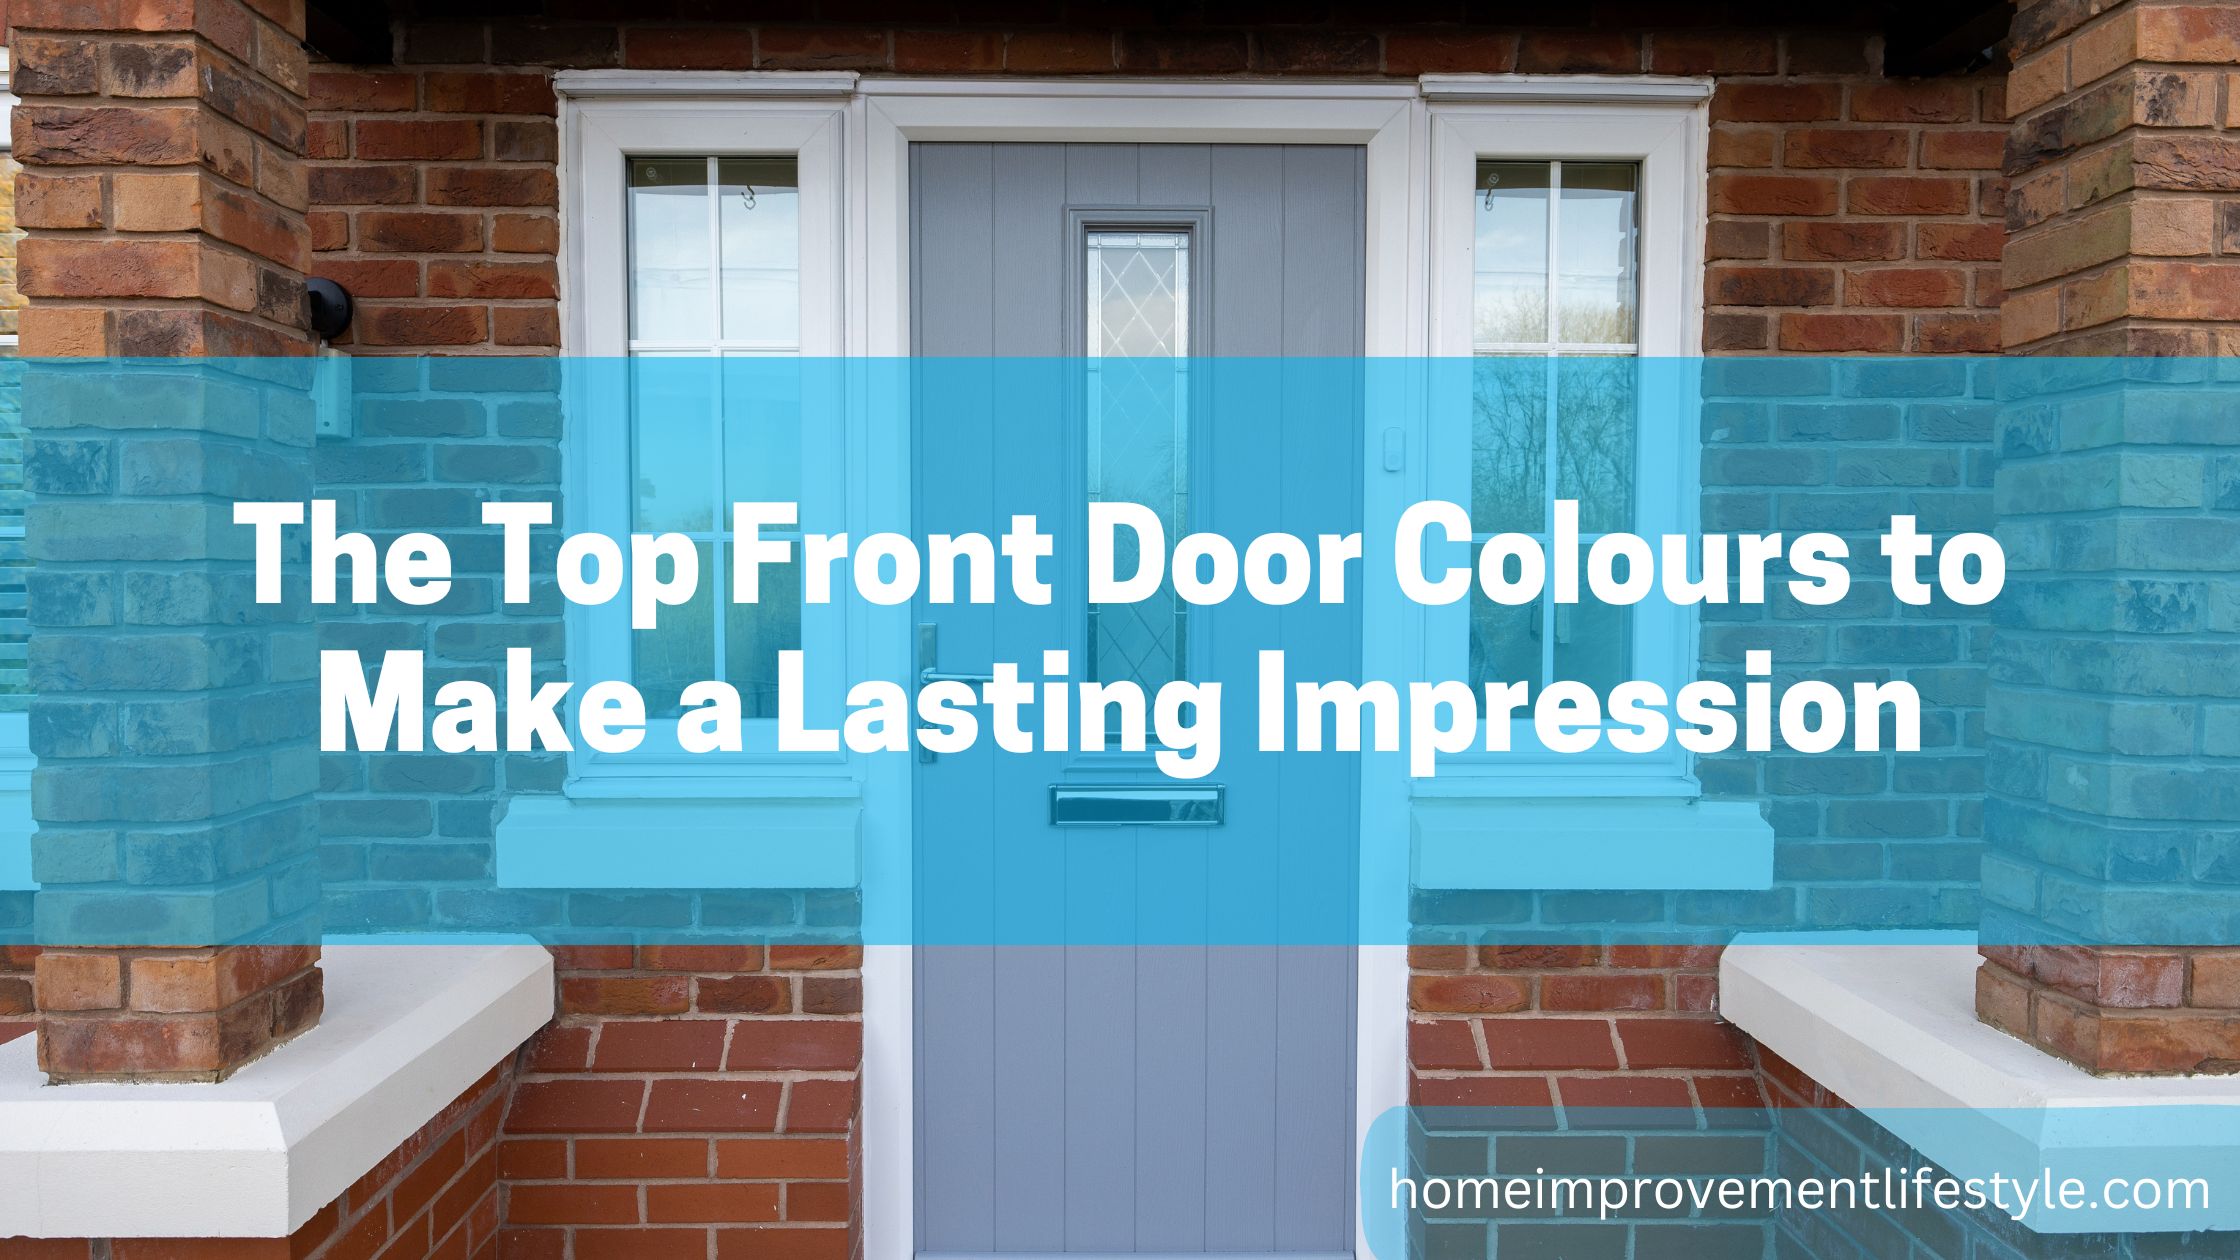 The Top Front Door Colours to Make a Lasting Impression